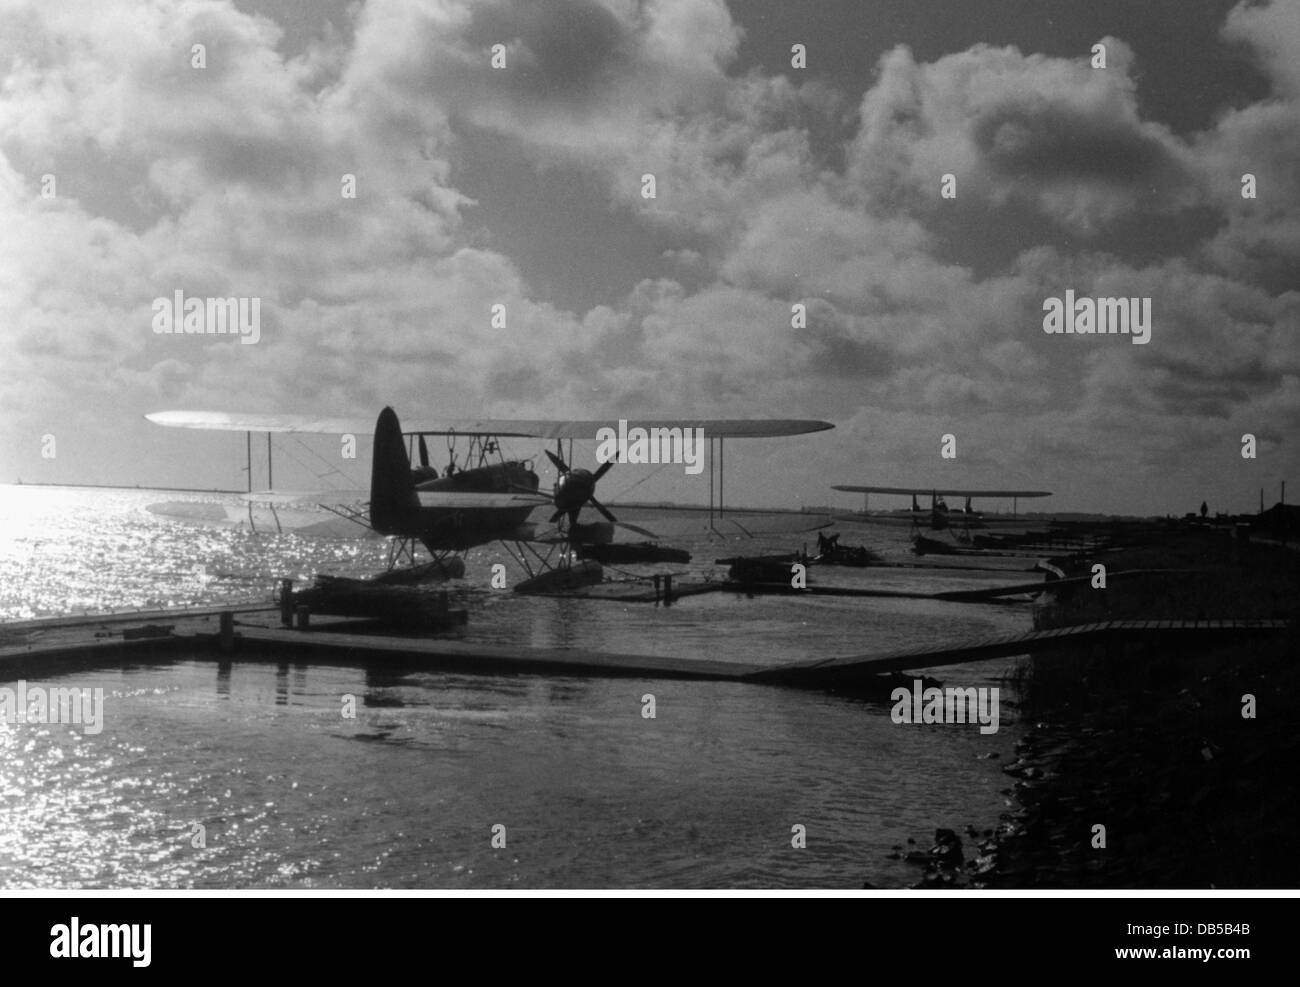 events, Second World War / WWII, aerial warfare, aircraft, German seaplanes Heinkel He 59 in a Dutch sea-airport, 2.7.1942, seaplane, plane, airport, sea, Luftwaffe, Wehrmacht, 20th century, historic, historical, Germany, German occupation, rescue planes, biplane, He59, He-59, coast, Holland, Netherlands, 1940s, Additional-Rights-Clearences-Not Available Stock Photo